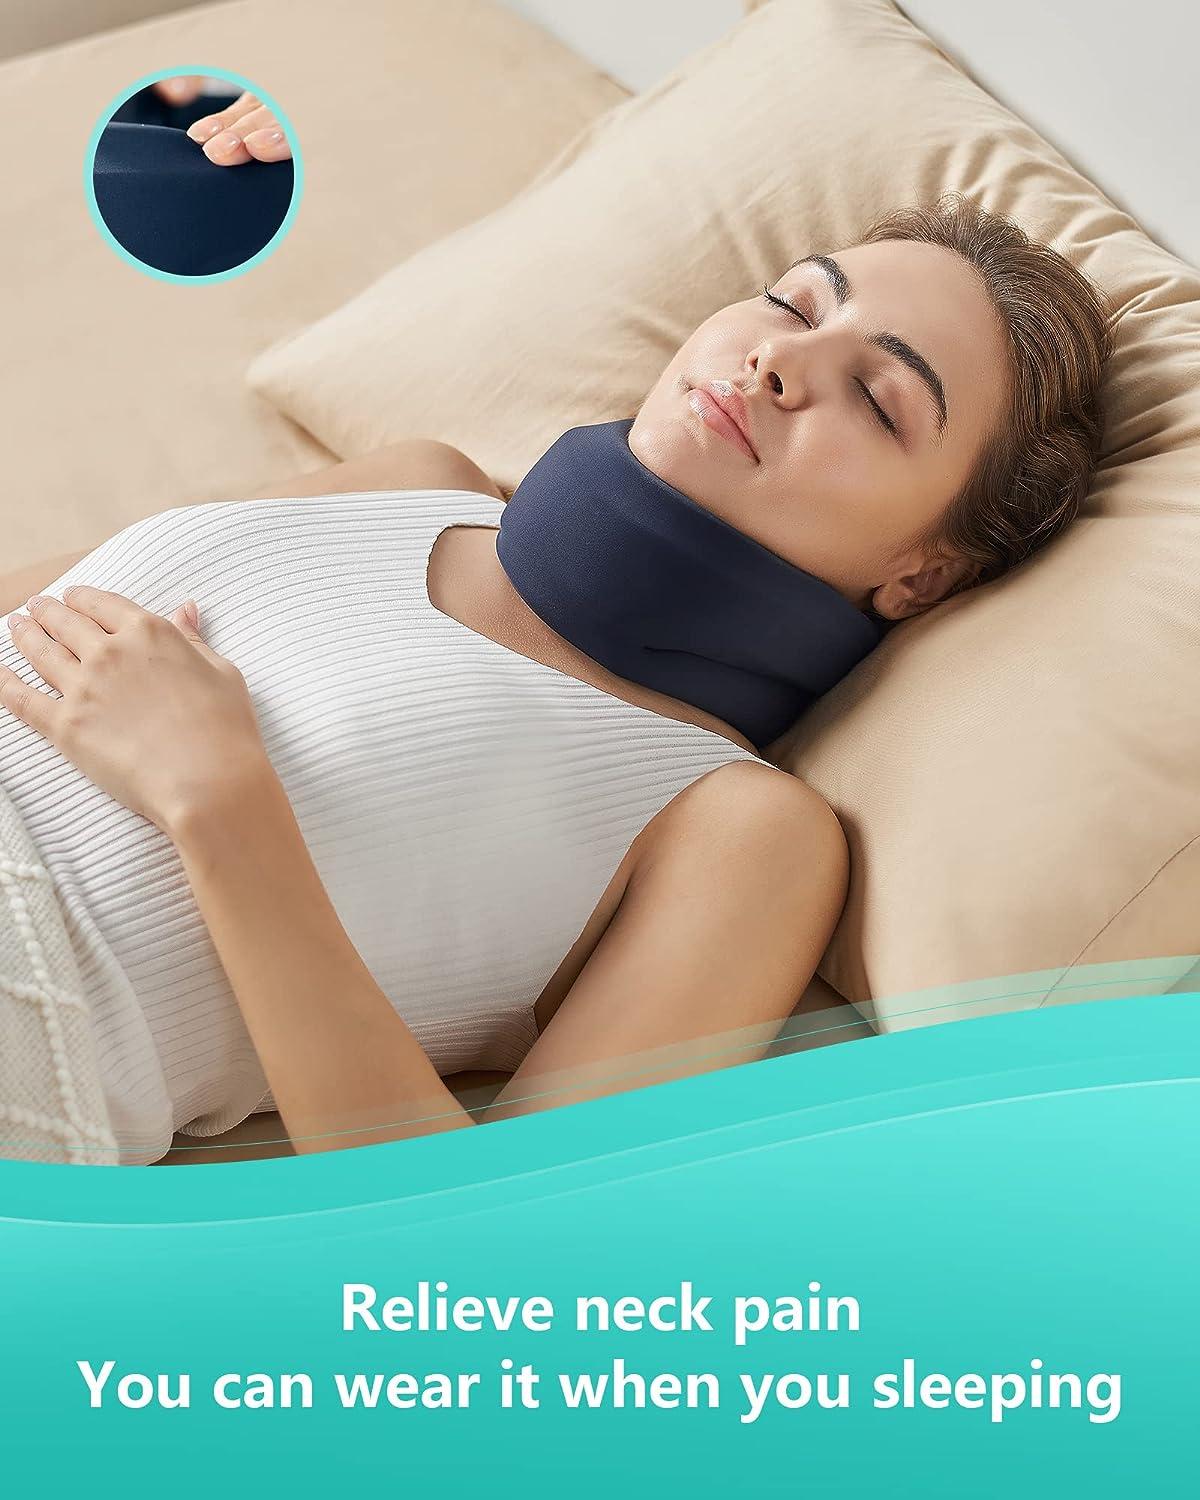 Neck Brace Cervical Collar for Sleeping - Relief Neck Pain and Neck Support  Soft Foam Wraps Keep Vertebrae Stable and Aligned for Relief of Cervical  Spine Pressure for Women & Men (Blue-M